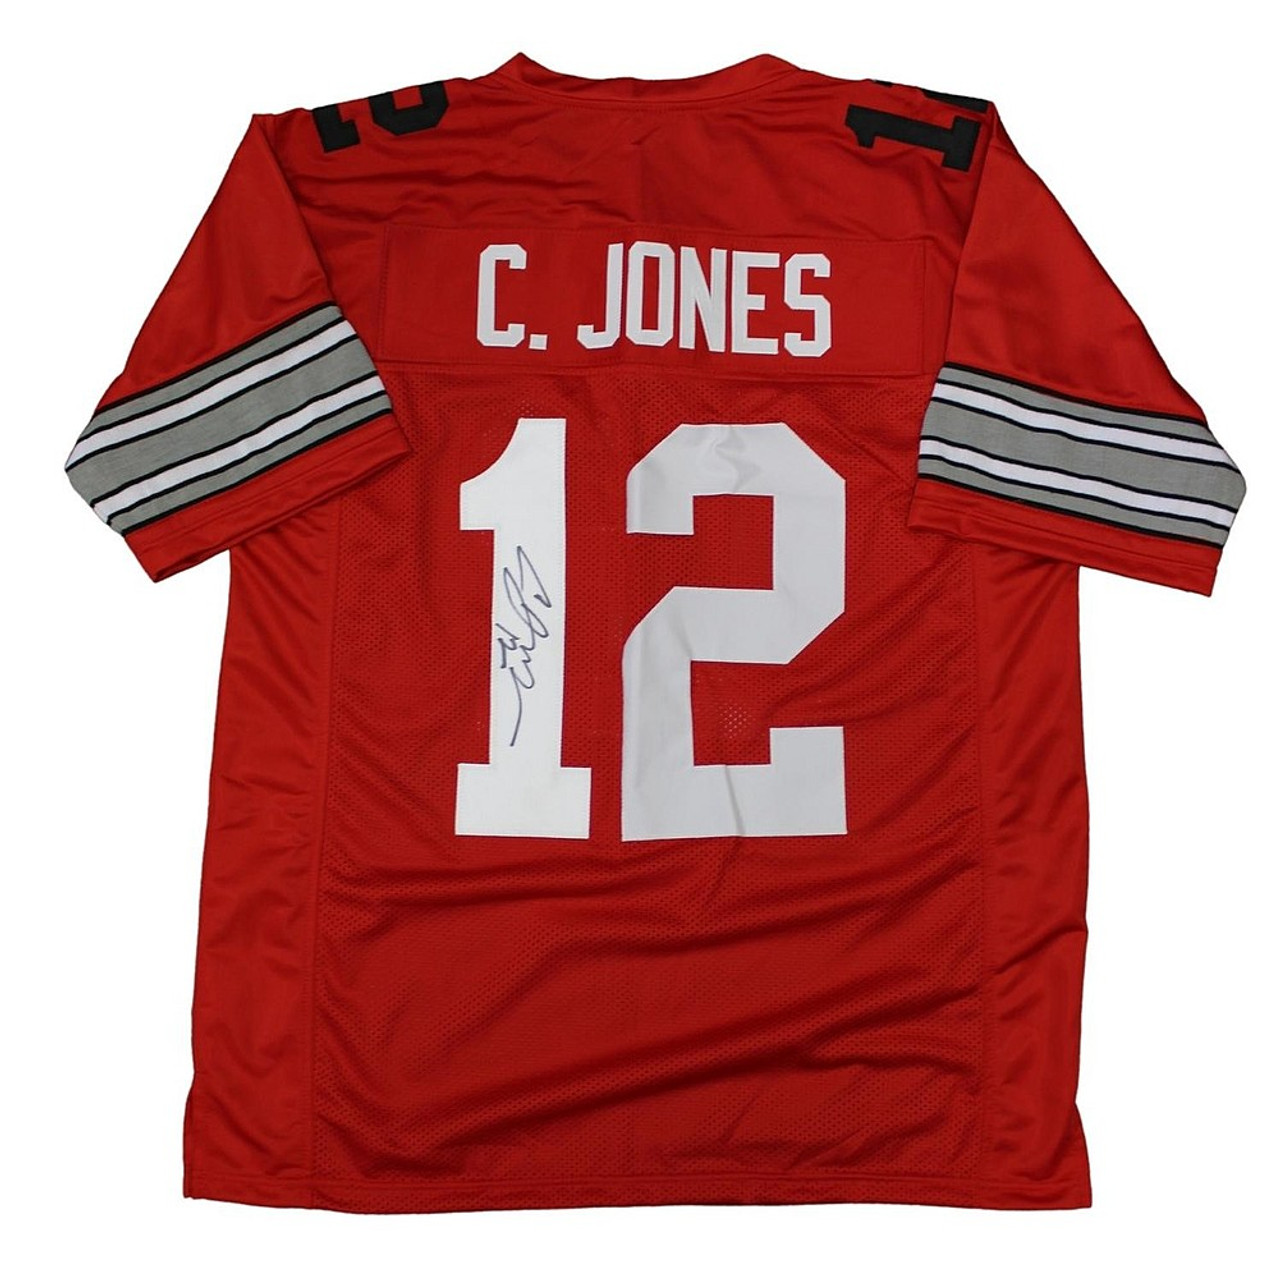 Cardale Jones Ohio State Buckeyes Autographed Signed Jersey - JSA Authentic